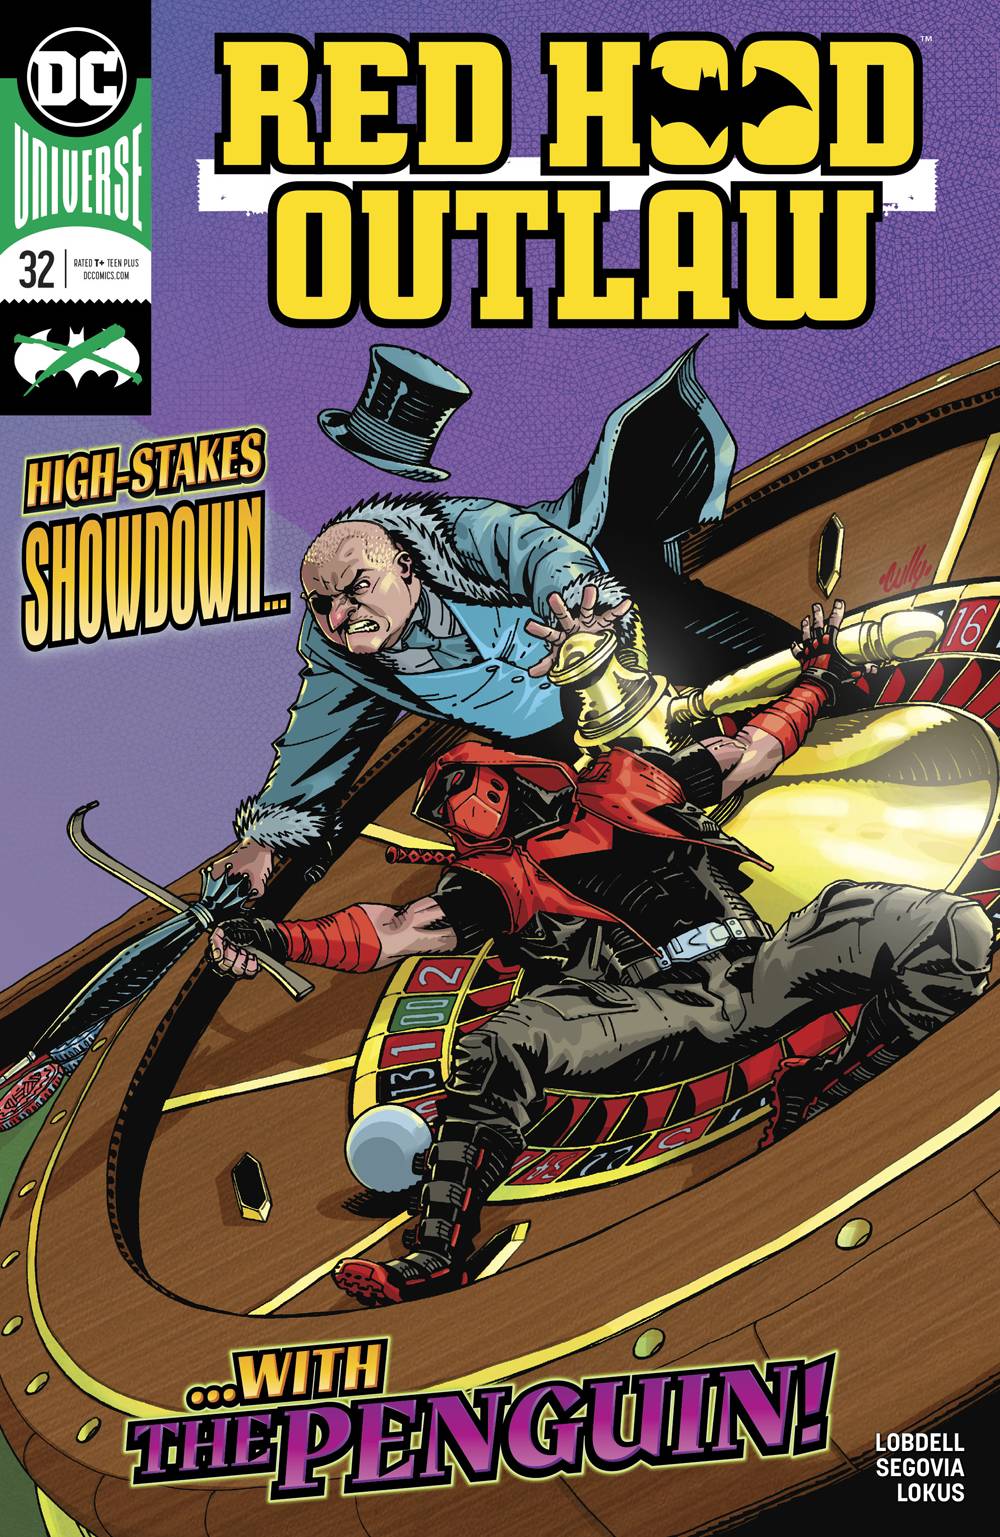 Red Hood Outlaw #32 (2016)